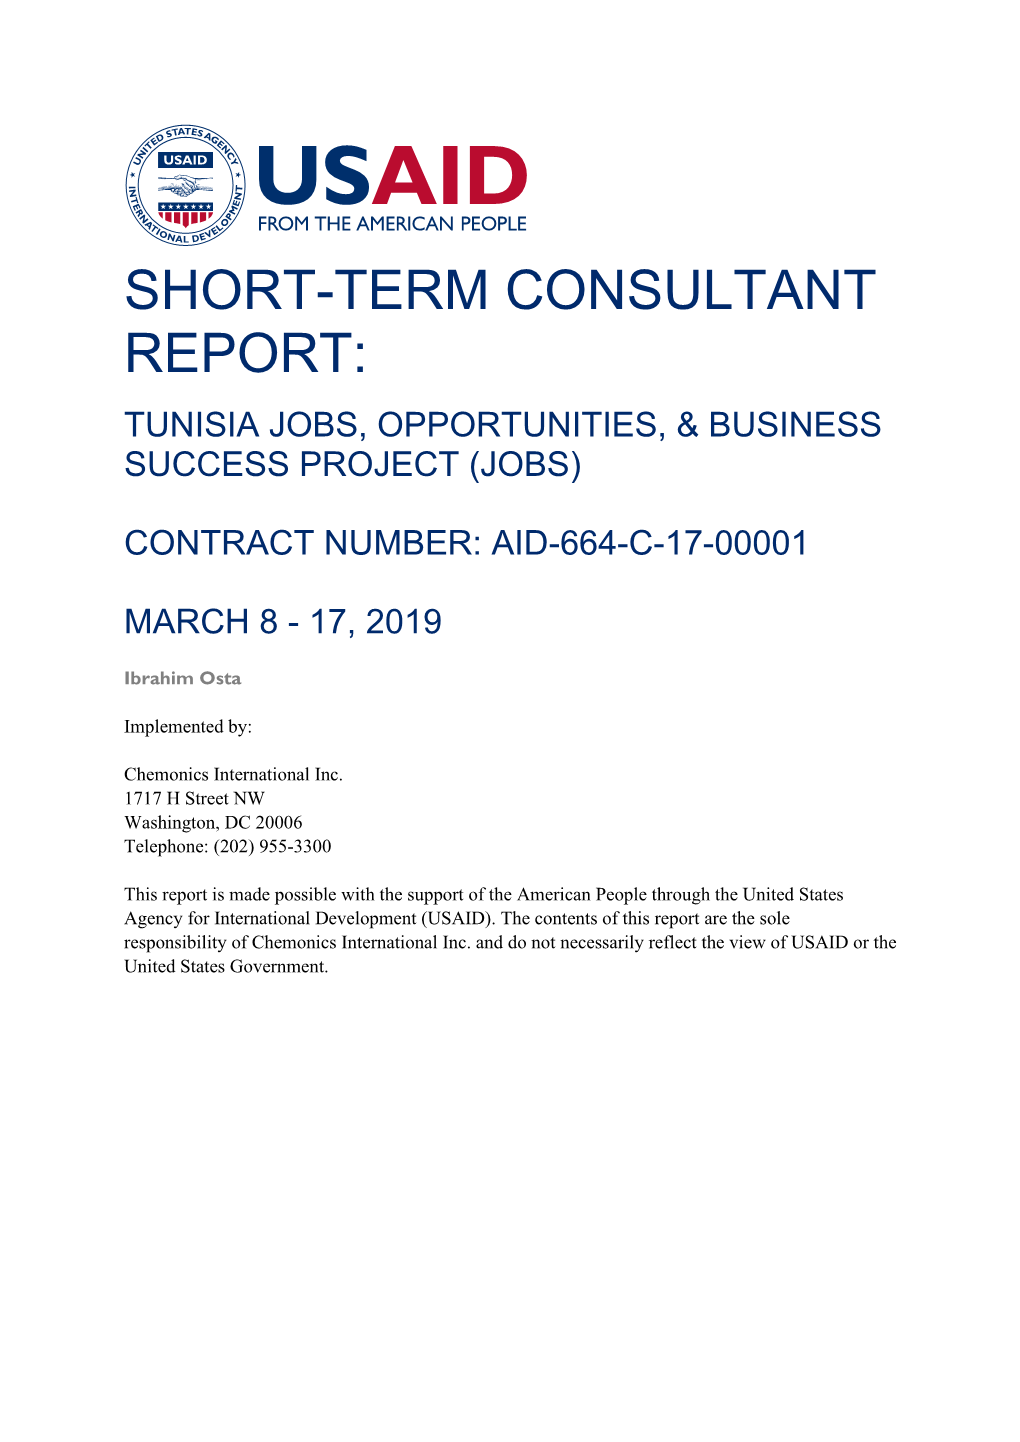 Short-Term Consultant Report: Tunisia Jobs, Opportunities, & Business Success Project (Jobs)